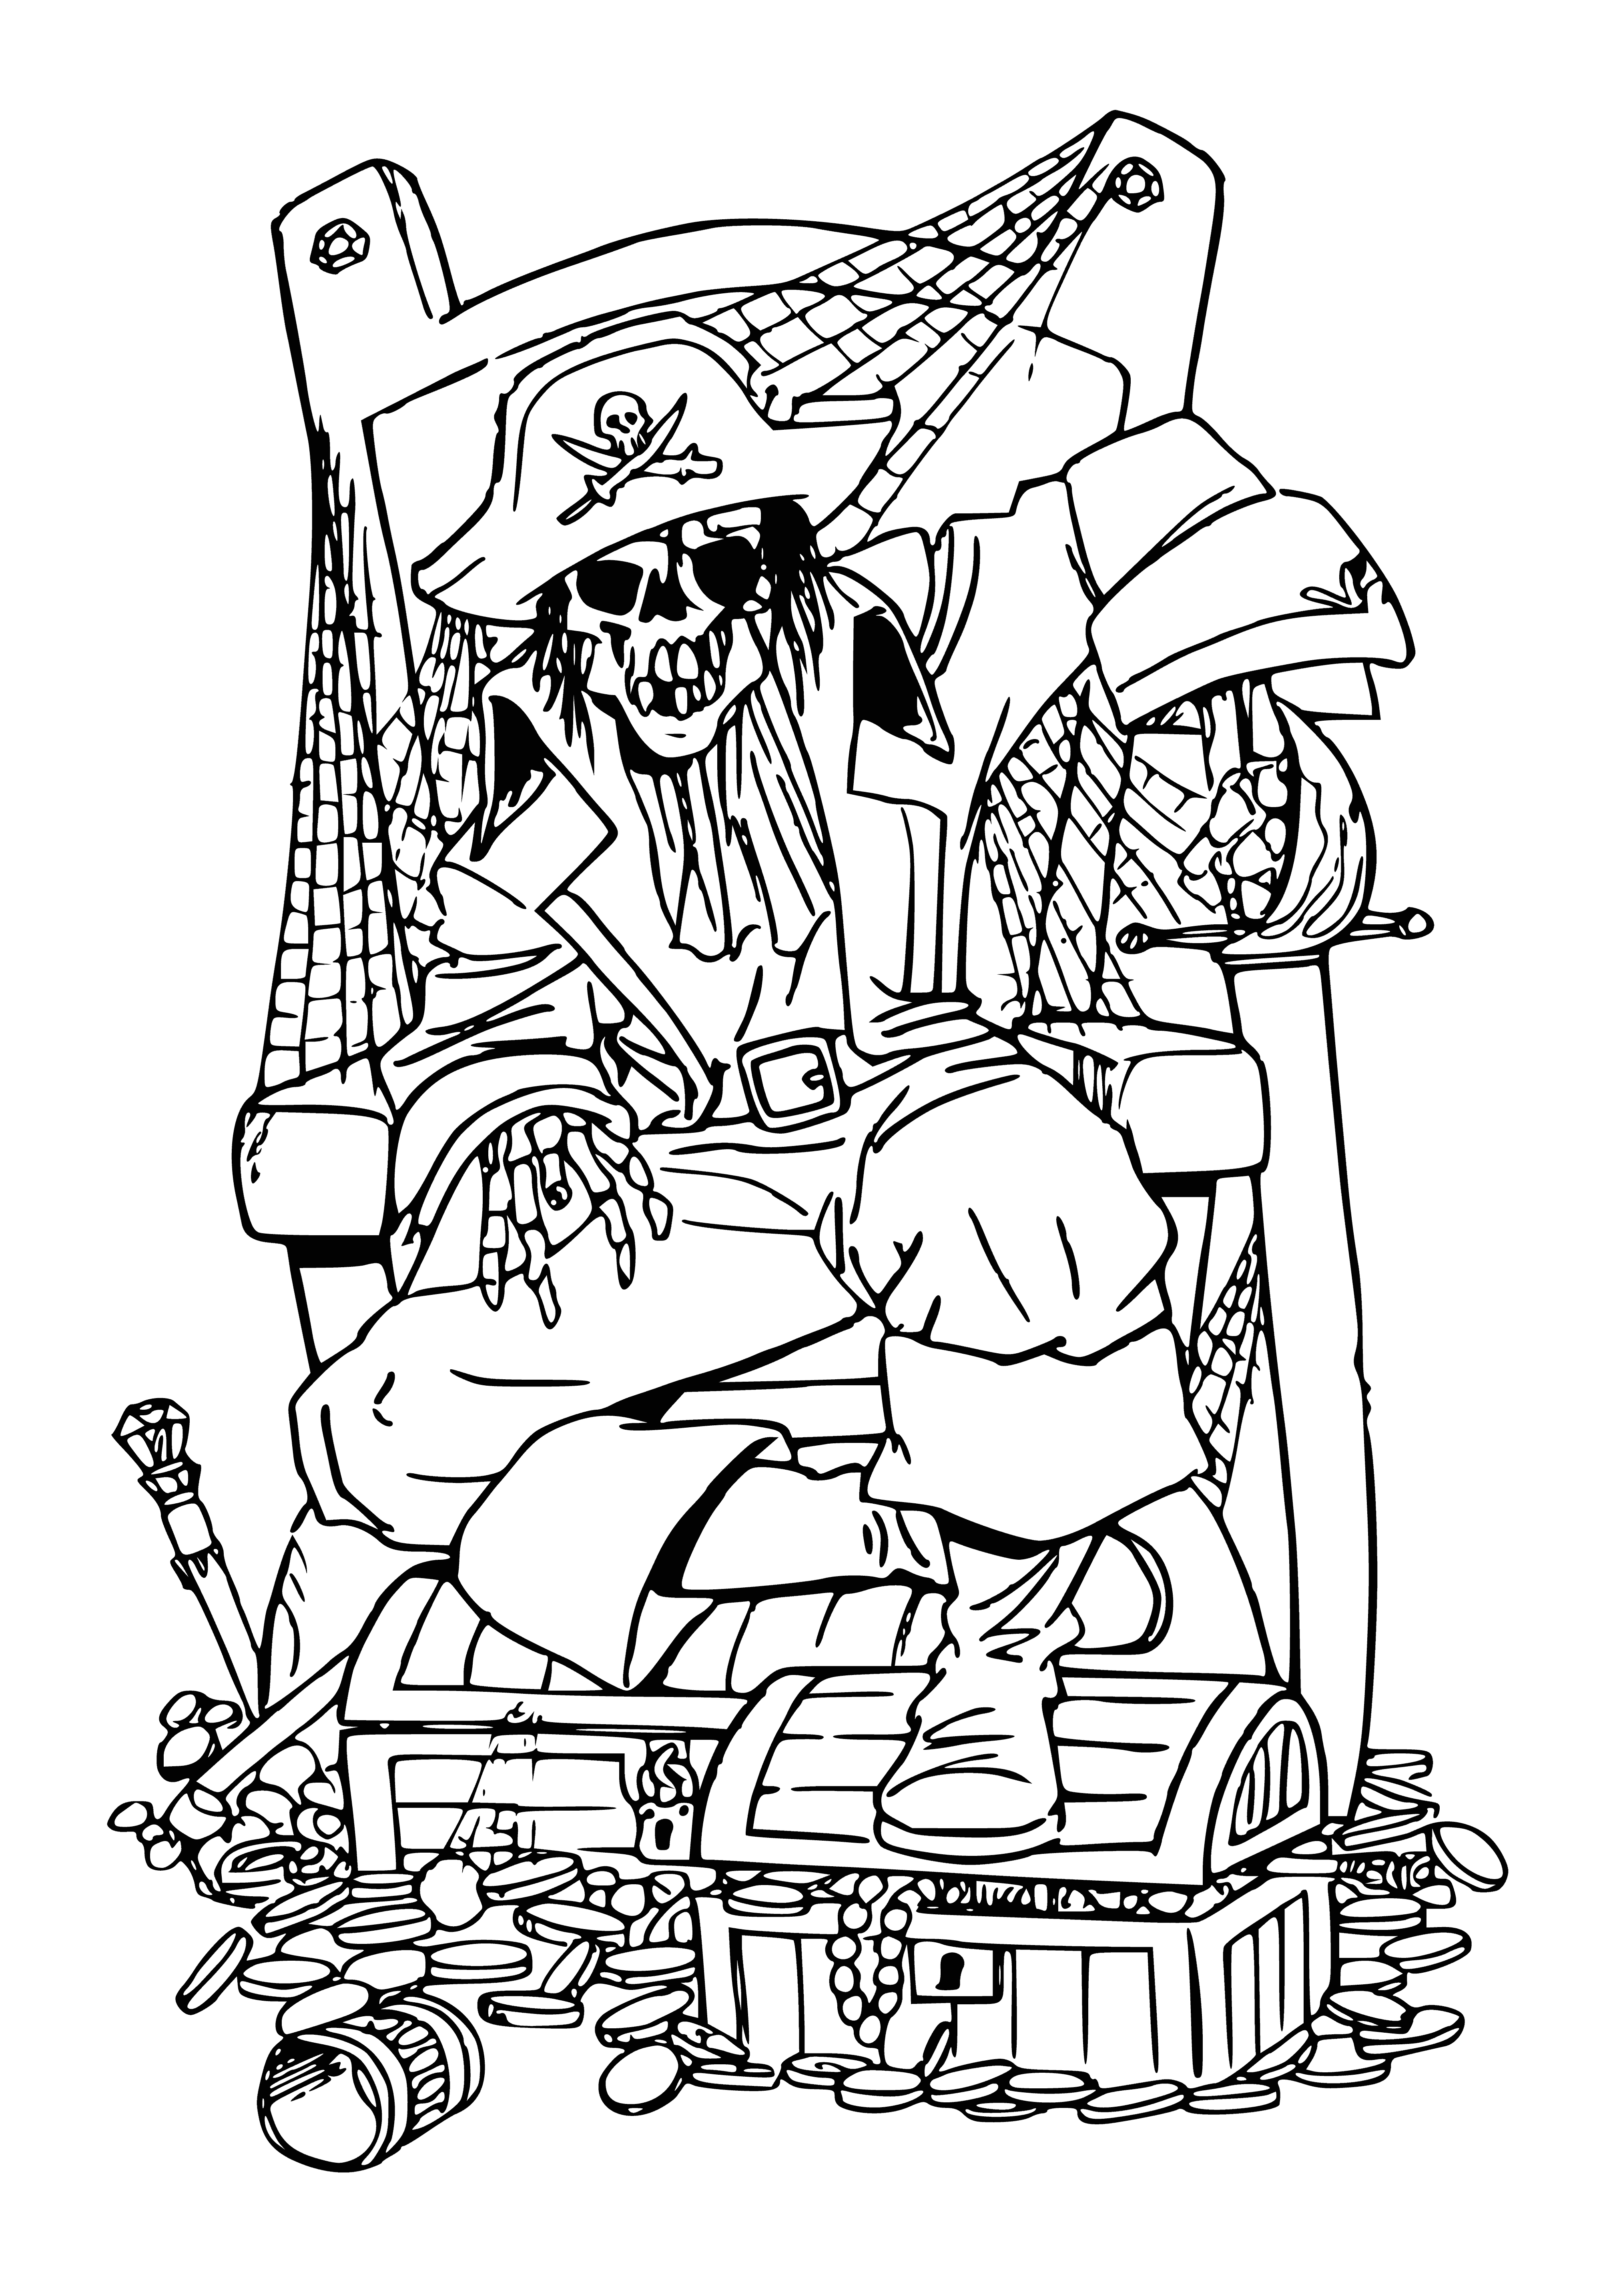 coloring page: The pirates encounter an old skeleton in a treasure chest, angrily looking back at them.